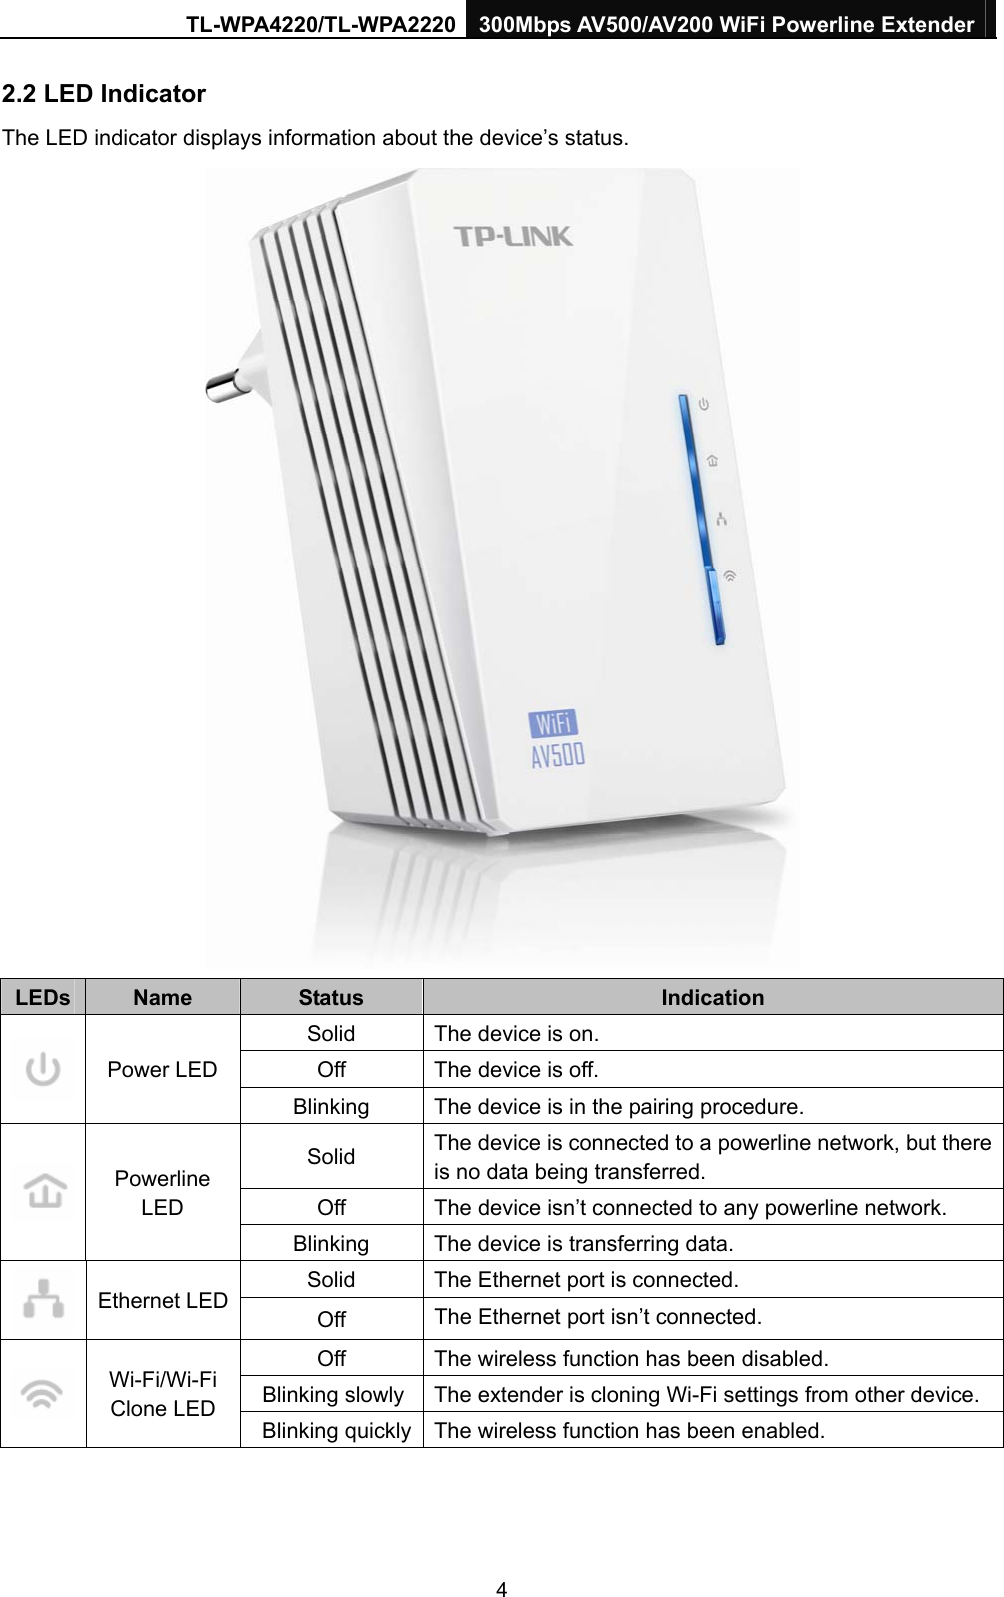 TL-WPA4220/TL-WPA2220 300Mbps AV500/AV200 WiFi Powerline Extender  4 2.2 LED Indicator The LED indicator displays information about the device’s status.  LEDs  Name  Status  Indication Solid  The device is on. Off  The device is off.    Power LED Blinking  The device is in the pairing procedure. Solid  The device is connected to a powerline network, but there is no data being transferred. Off  The device isn’t connected to any powerline network.  Powerline LED Blinking  The device is transferring data.   Solid  The Ethernet port is connected.  Ethernet LED  Off  The Ethernet port isn’t connected. Off  The wireless function has been disabled. Blinking slowly The extender is cloning Wi-Fi settings from other device.  Wi-Fi/Wi-Fi Clone LED Blinking quickly The wireless function has been enabled. 